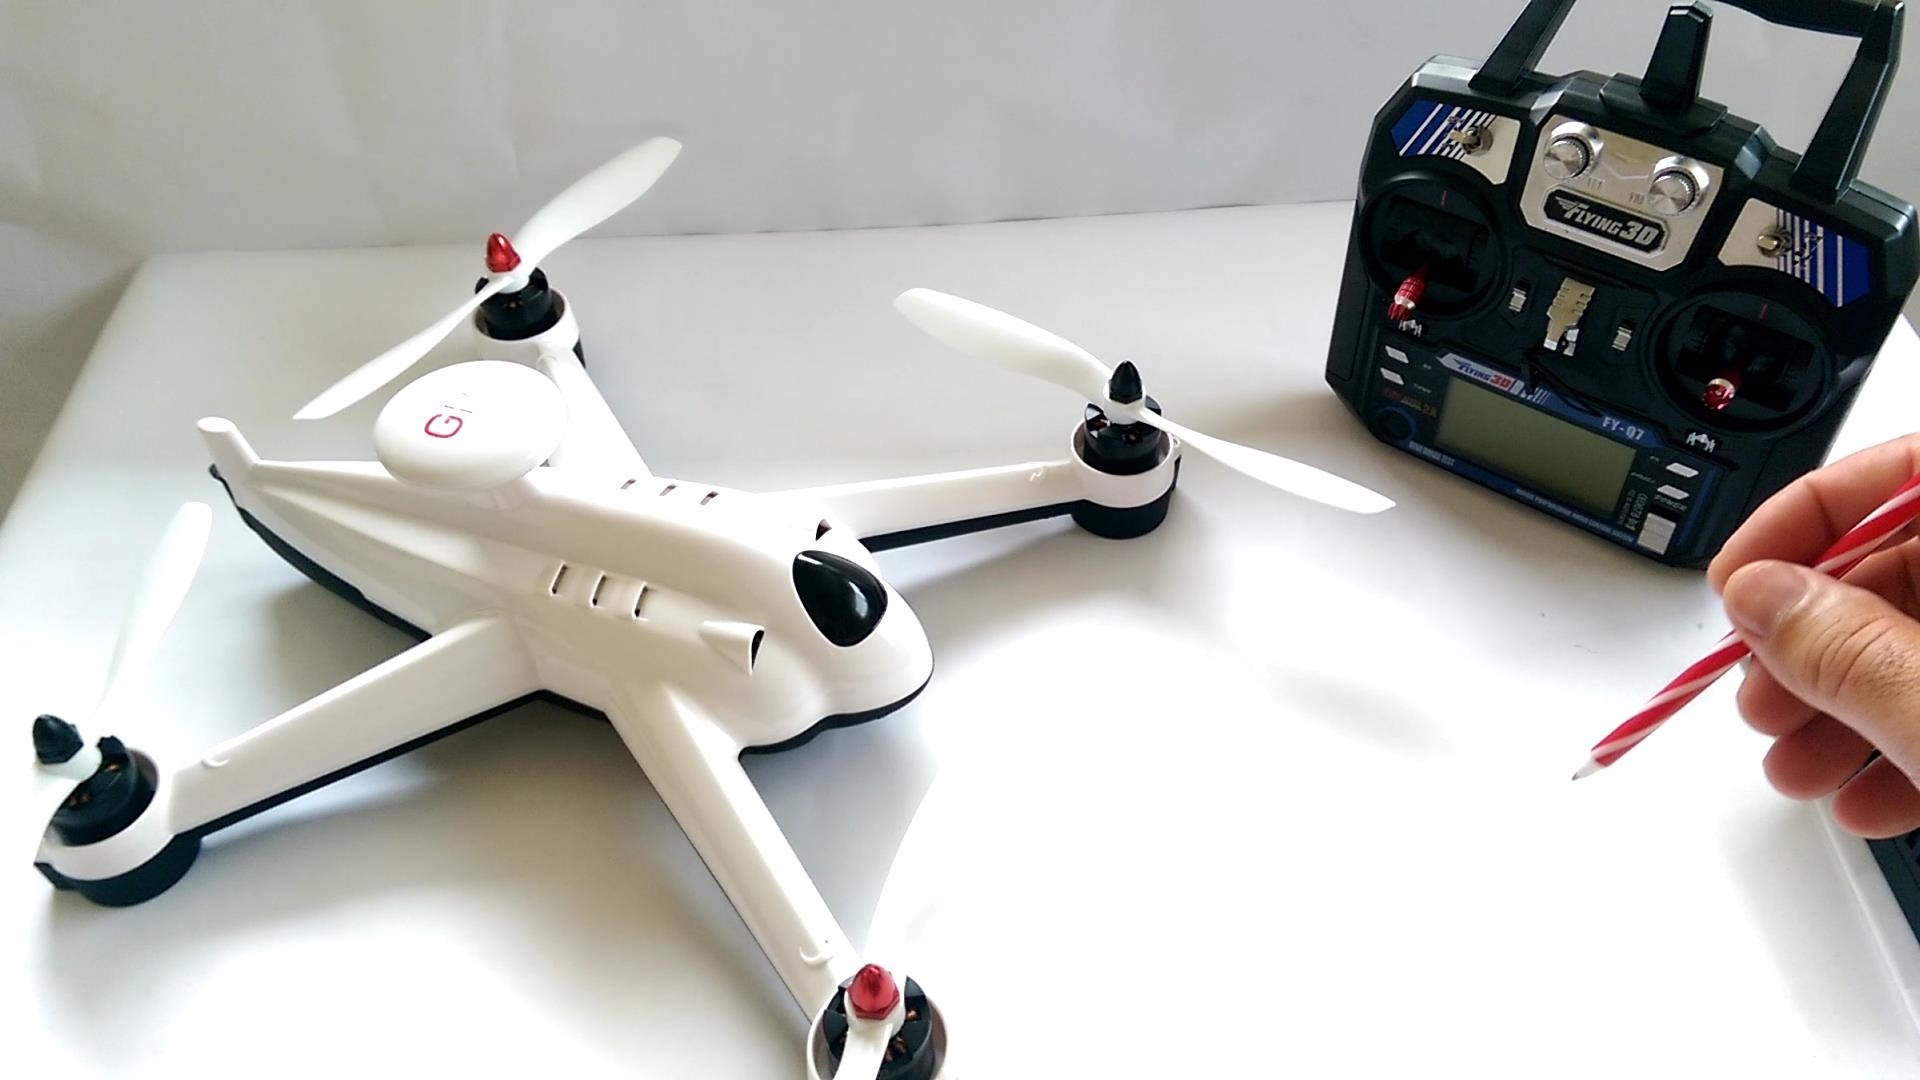 3D Flying X8 GPS QuadCopter Drone Complete Review – Flight Test, Video,  Speed, Range, Pros & Cons